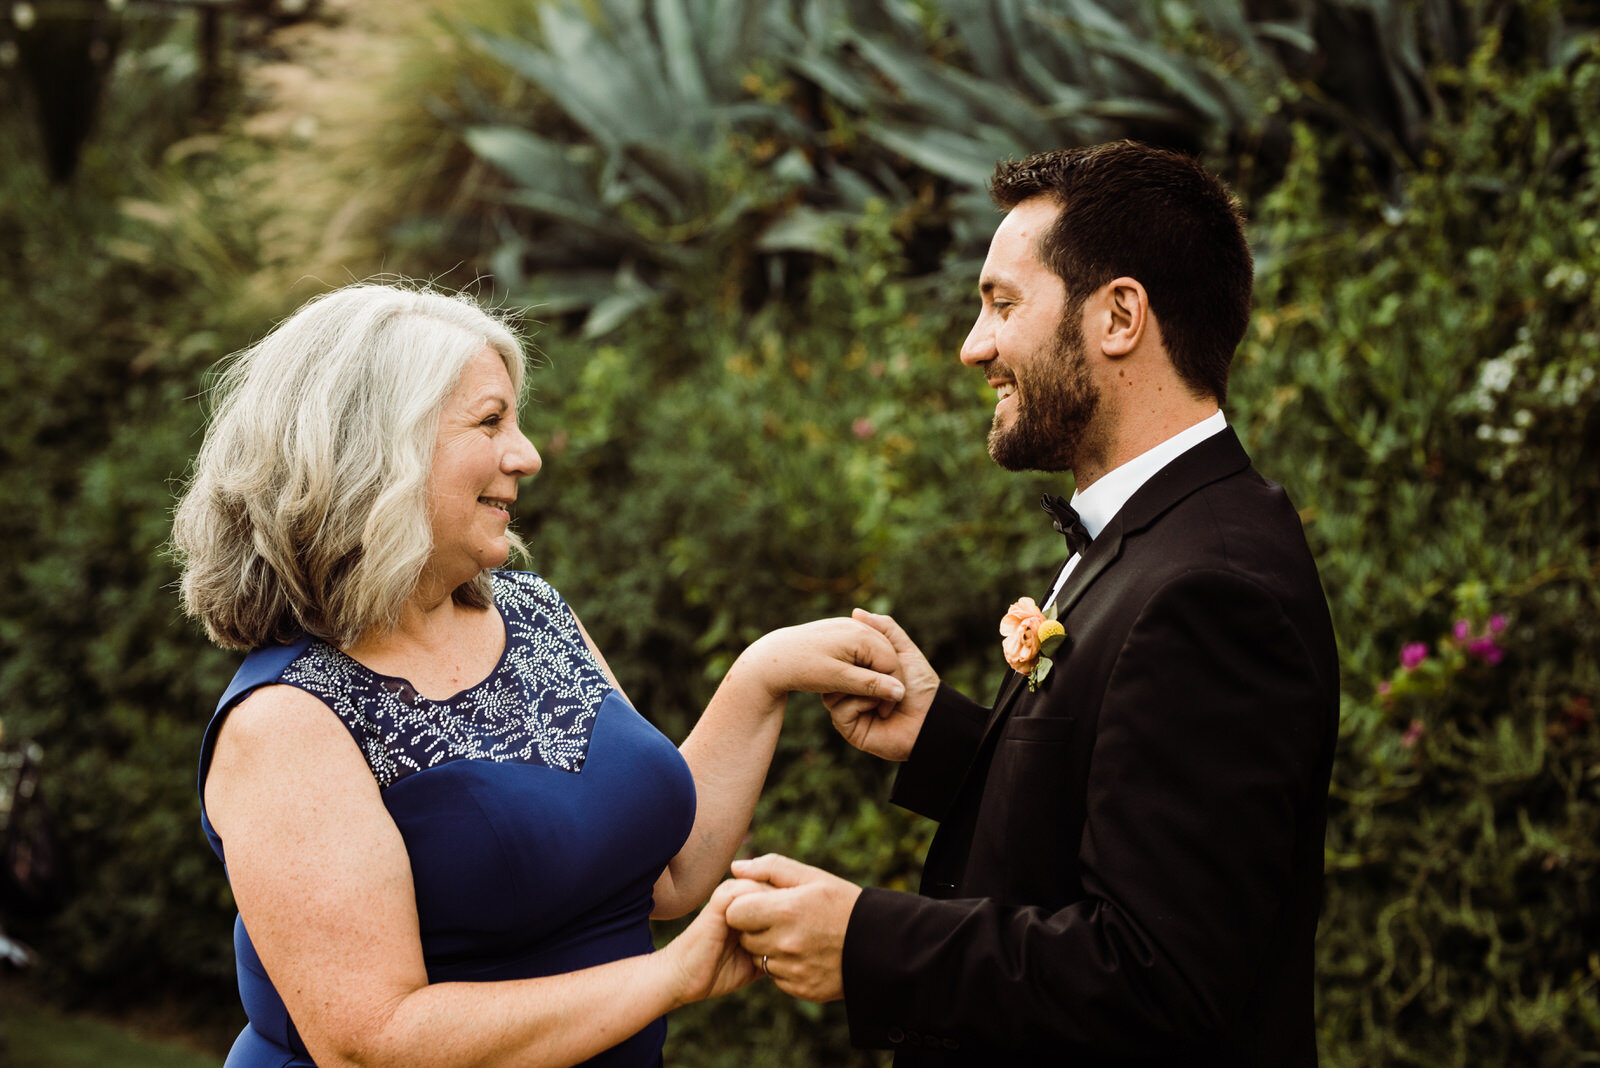 Mother of the groom wearing blue dress dancing 